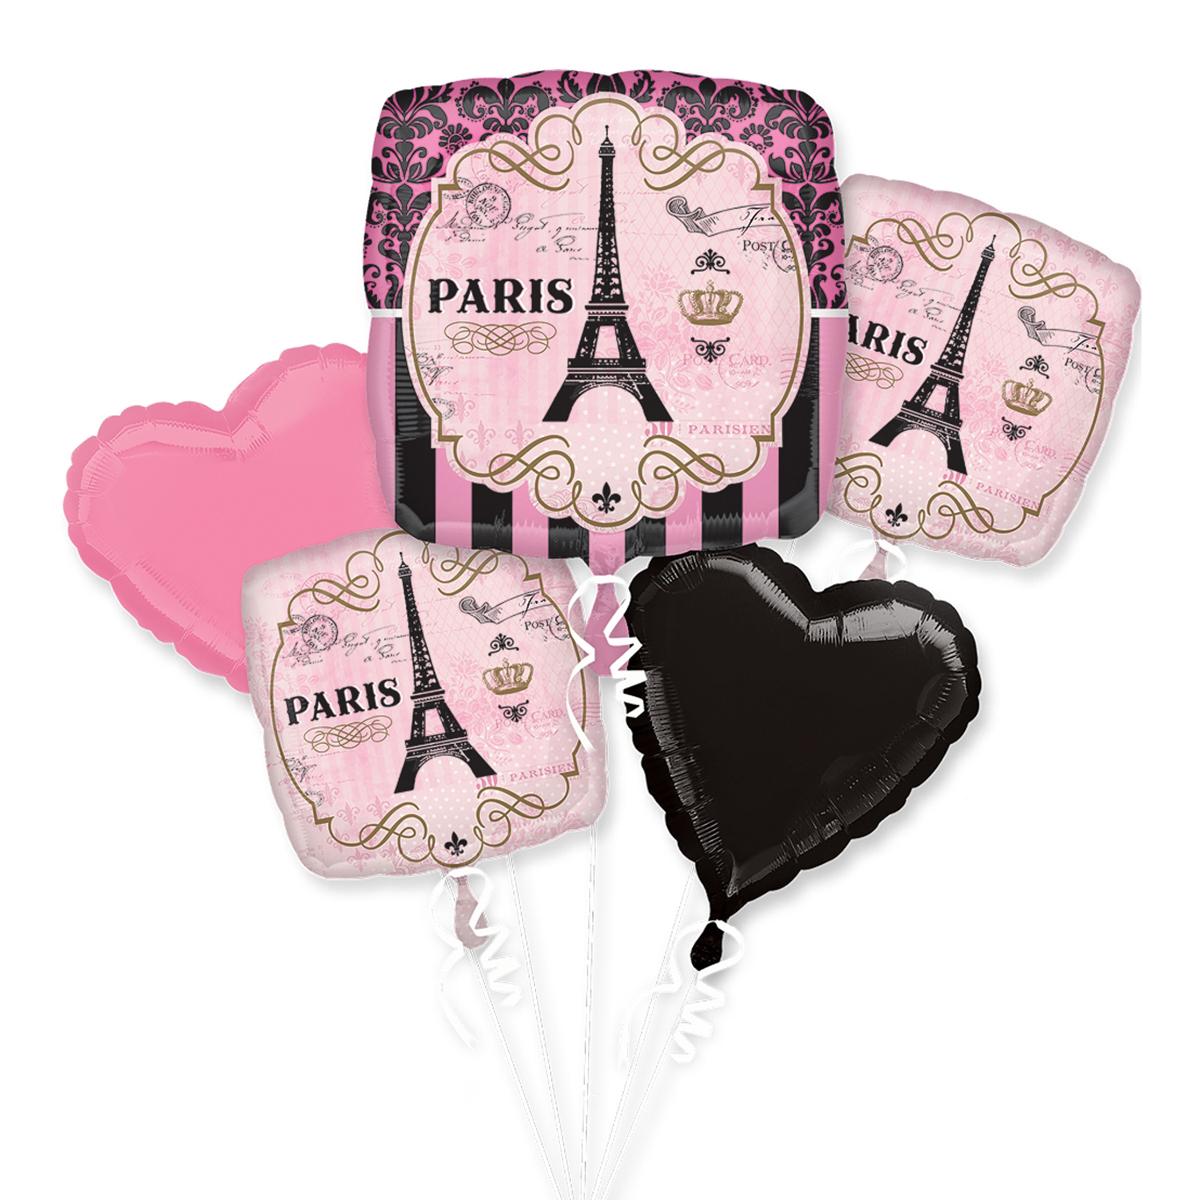 A Day in Paris Balloon Bouquet 5pcs Balloons & Streamers - Party Centre